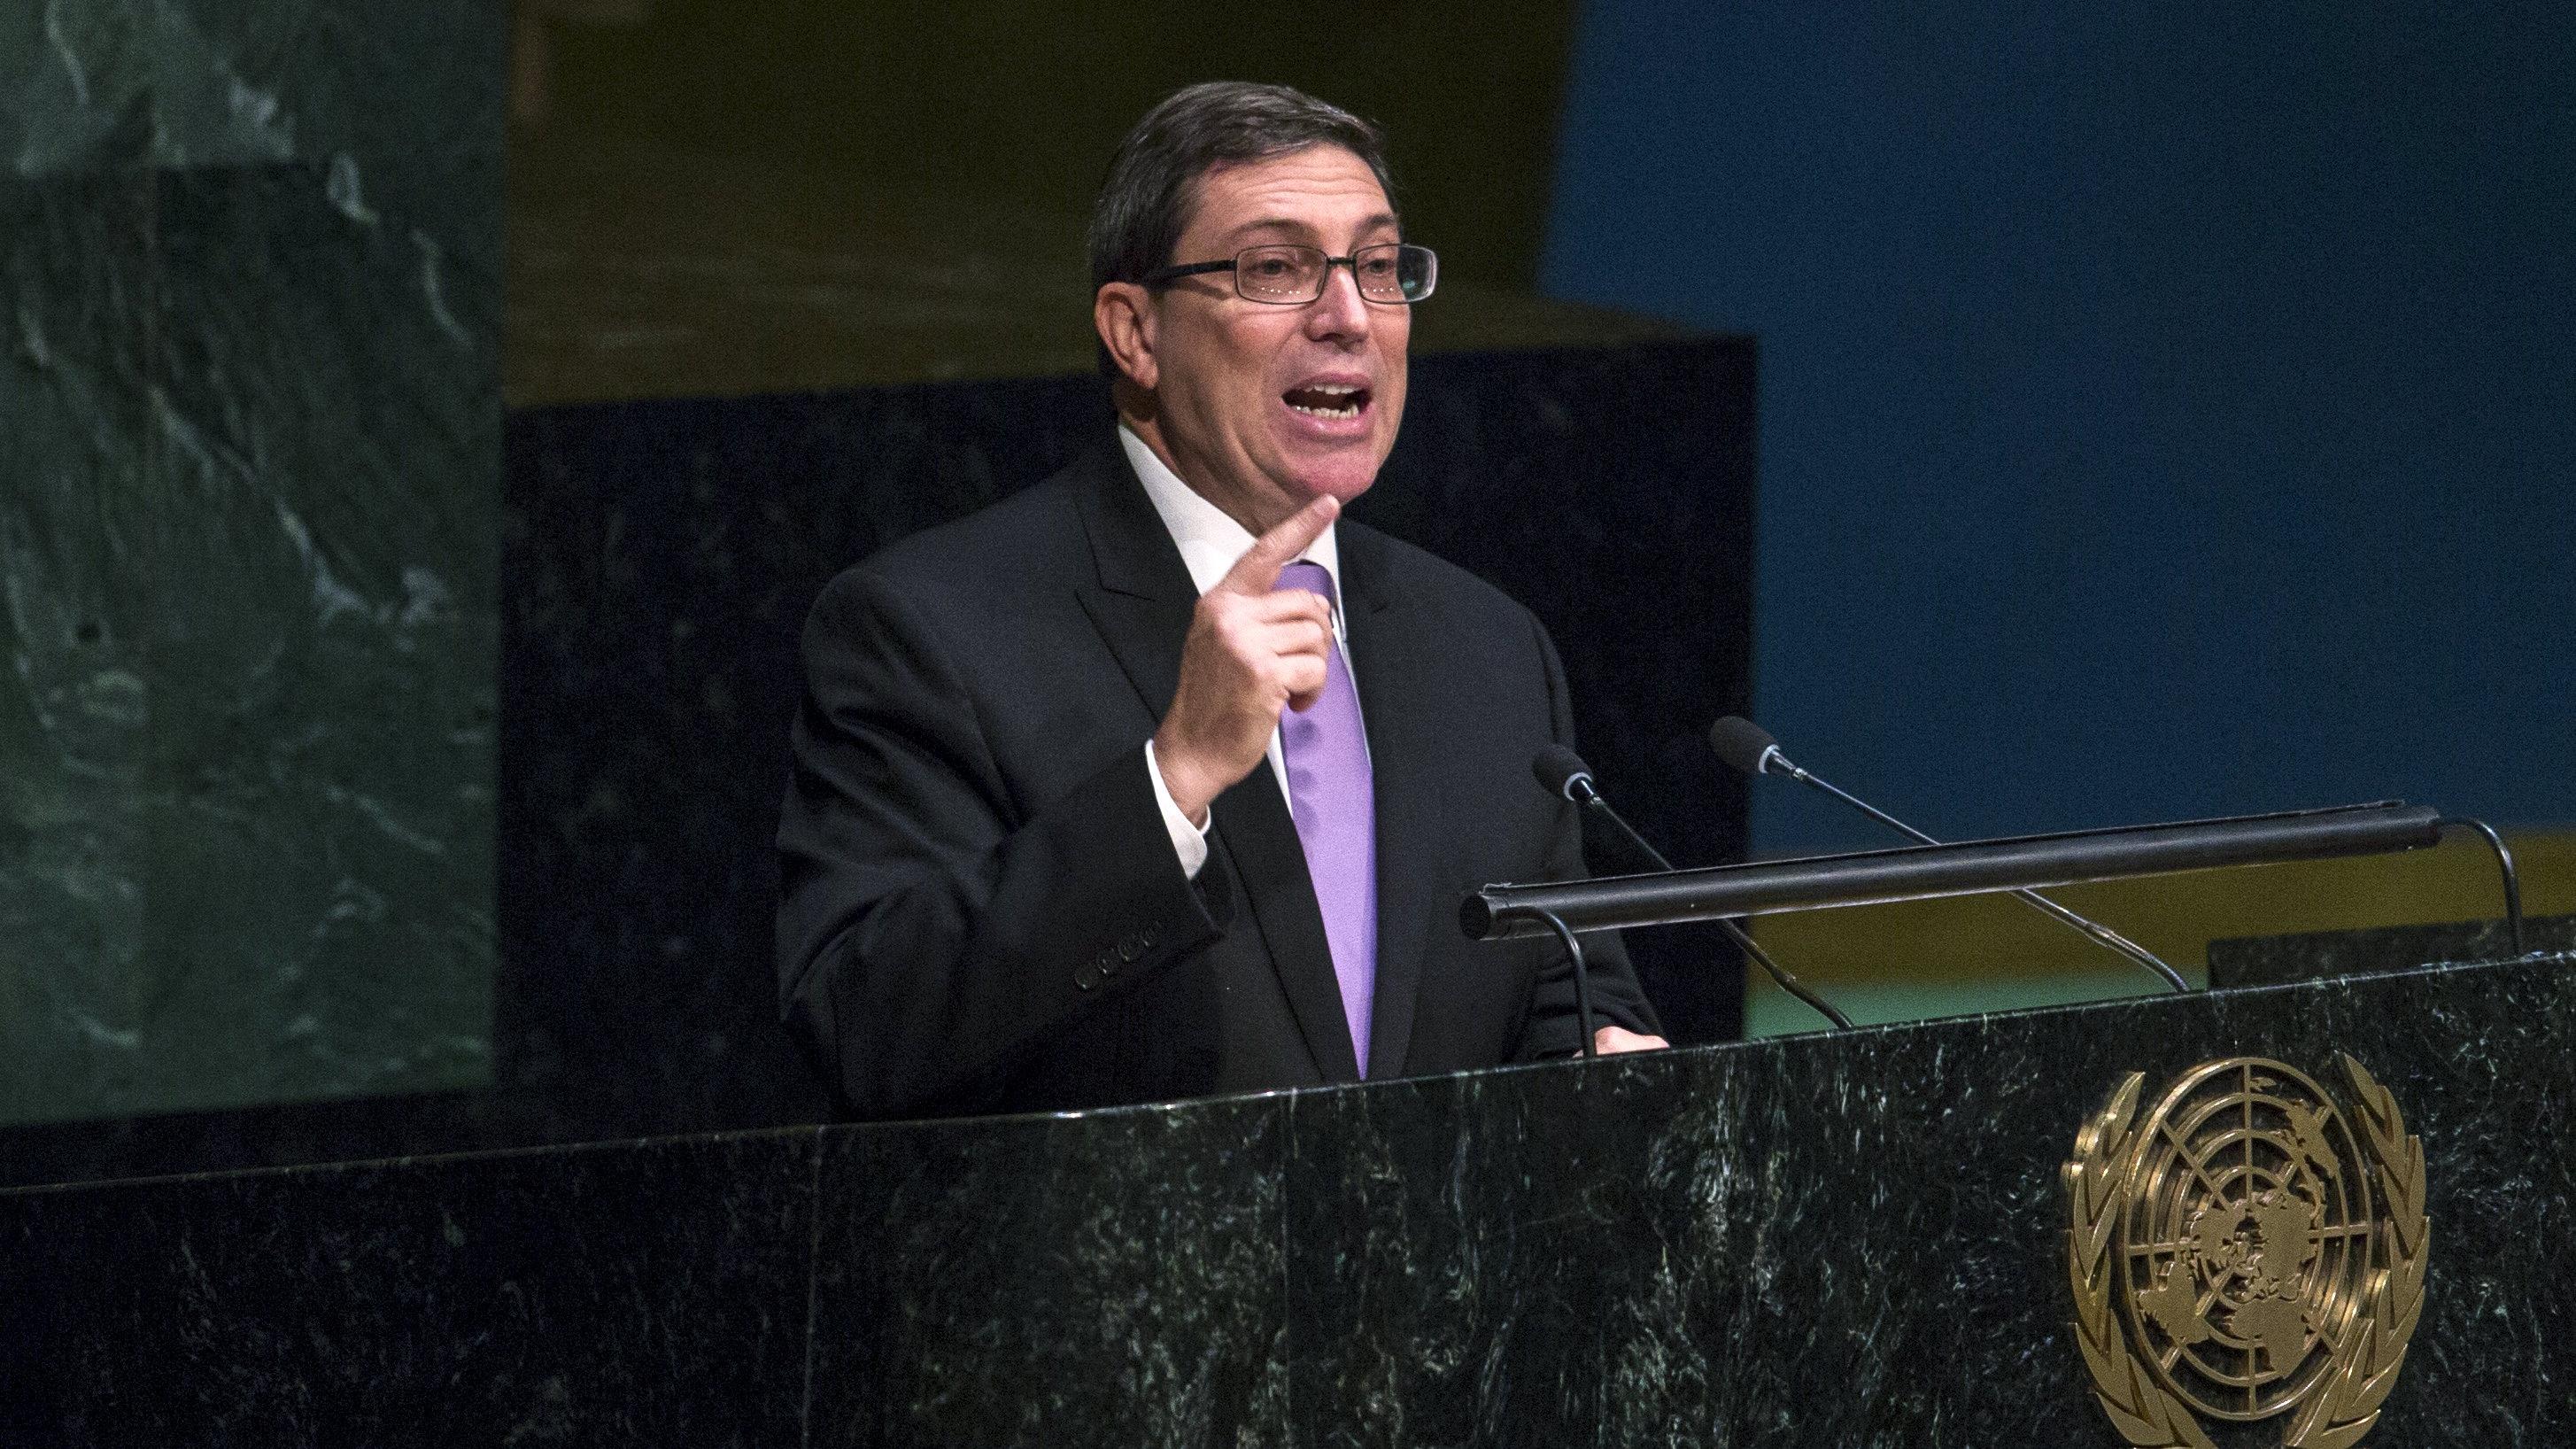 Cuban Foreign Minister Bruno Rodriguez speaks before a United Nations General Assembly vote on the Cuban blockade.